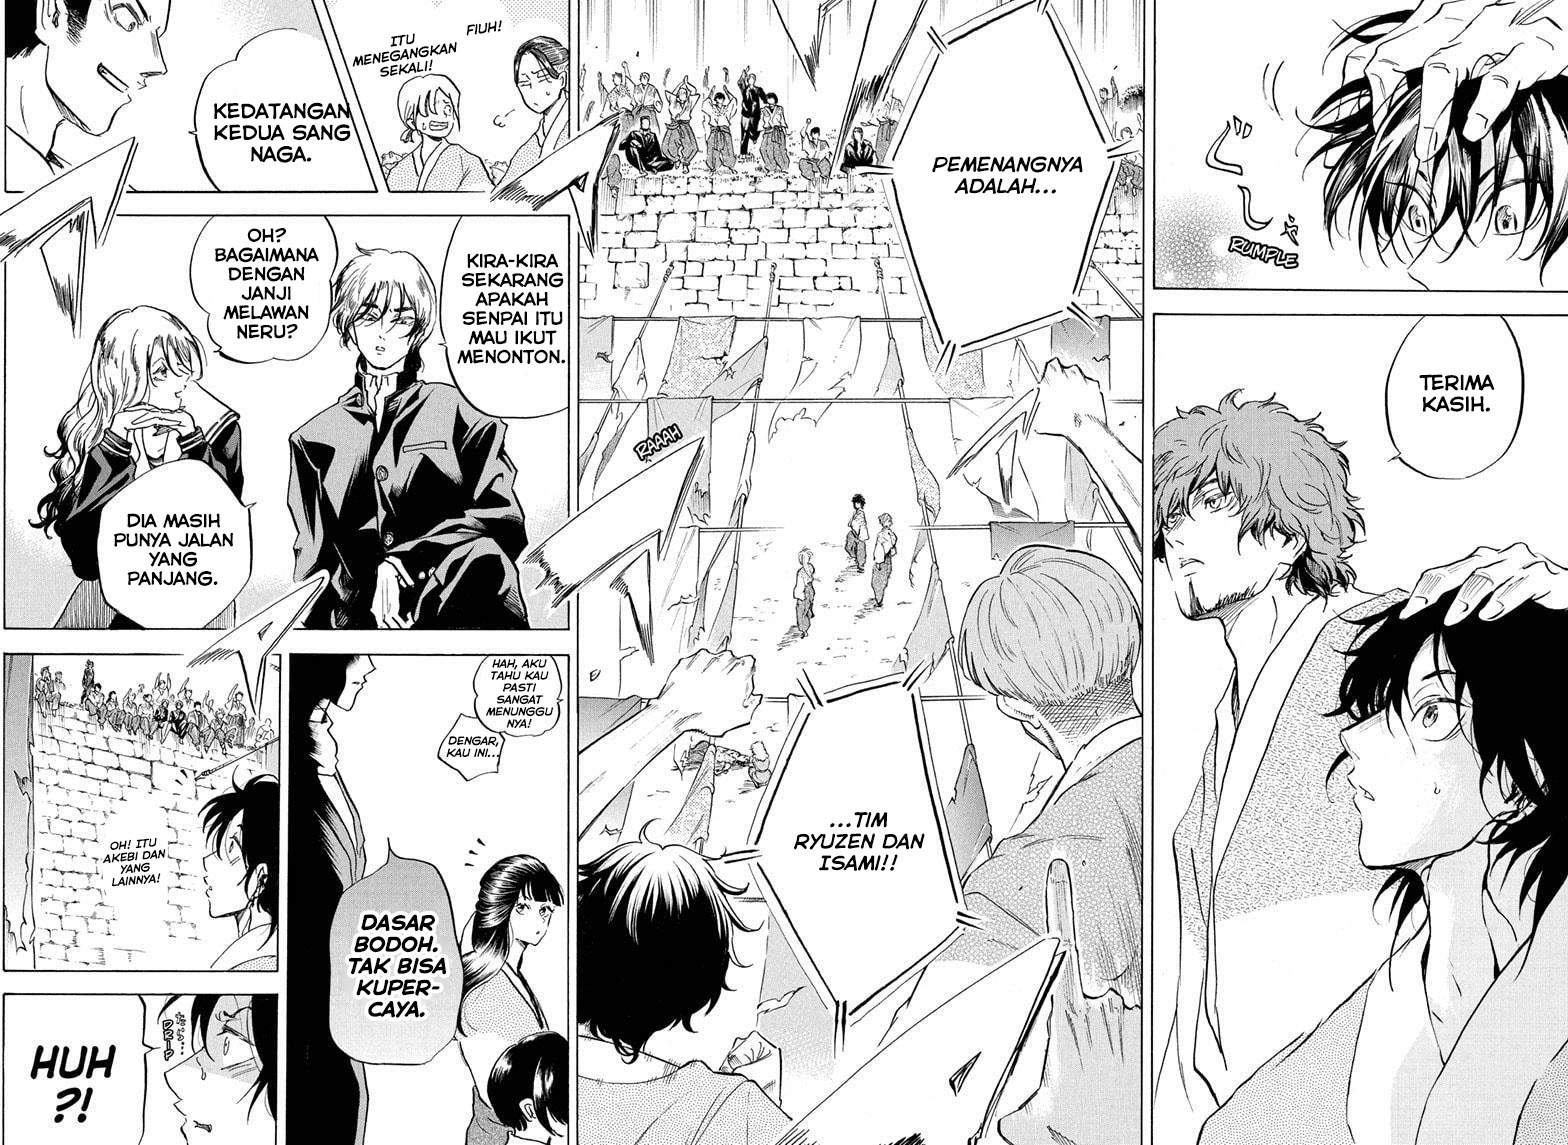 Neru Way of the Martial Artist Chapter 16